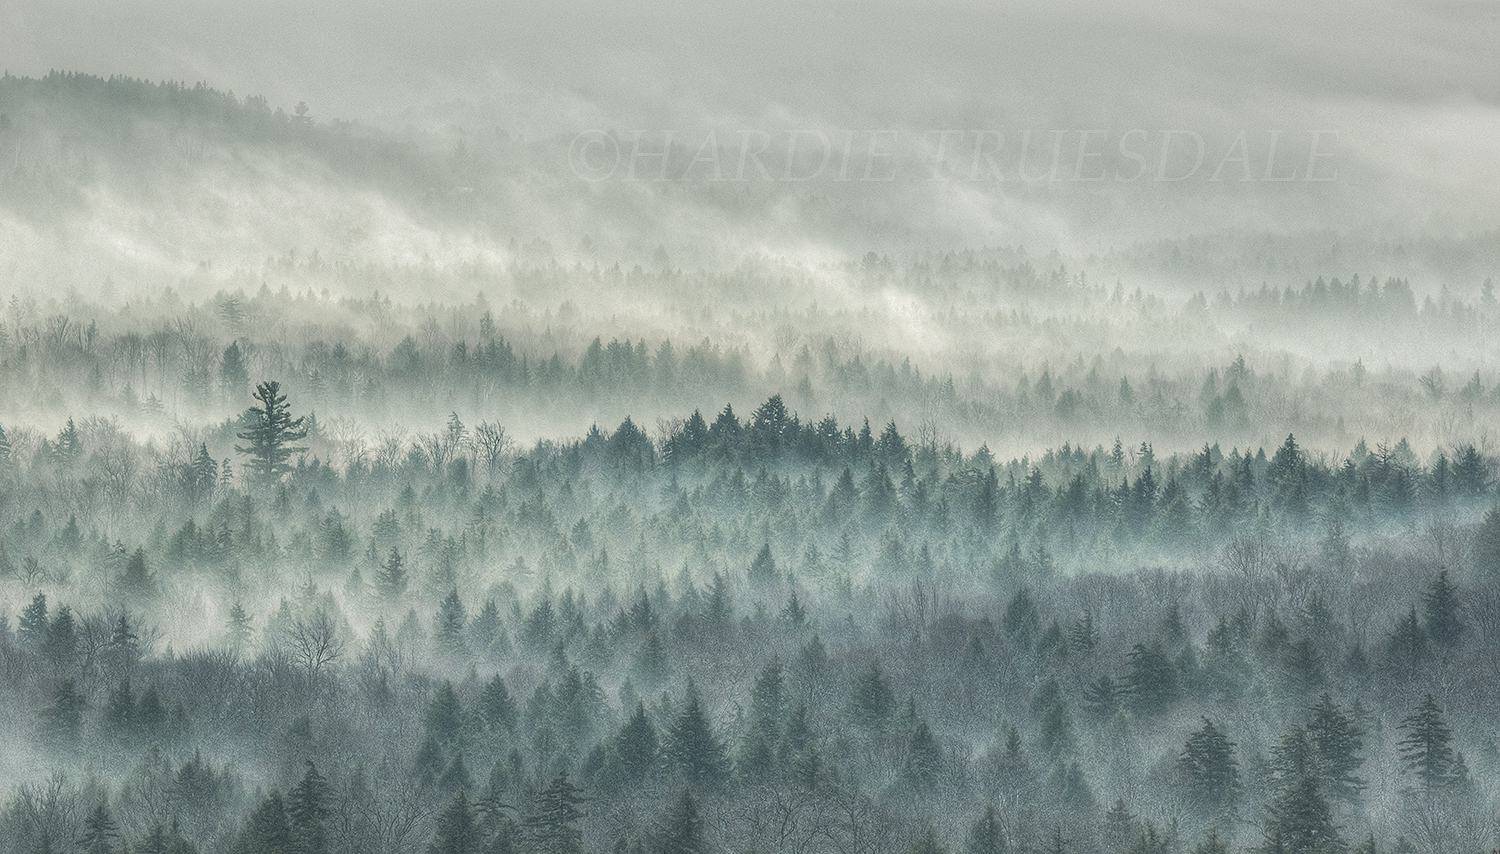 VT#33 "Trees and Mist, Green Mountains"